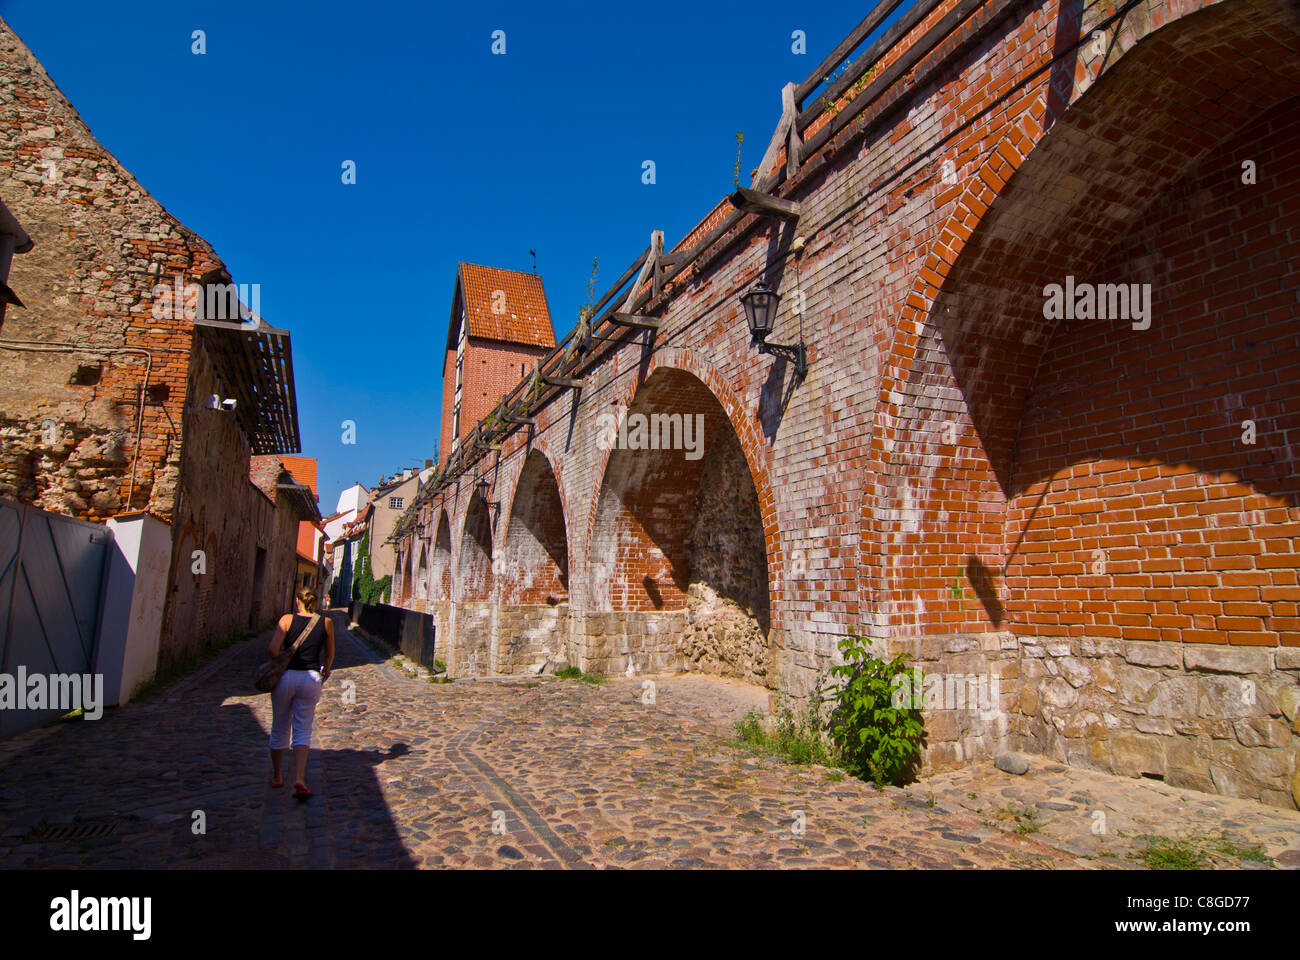 The old town walls of Riga, UNESCO World Heritage Site, Latvia, Baltic States Stock Photo